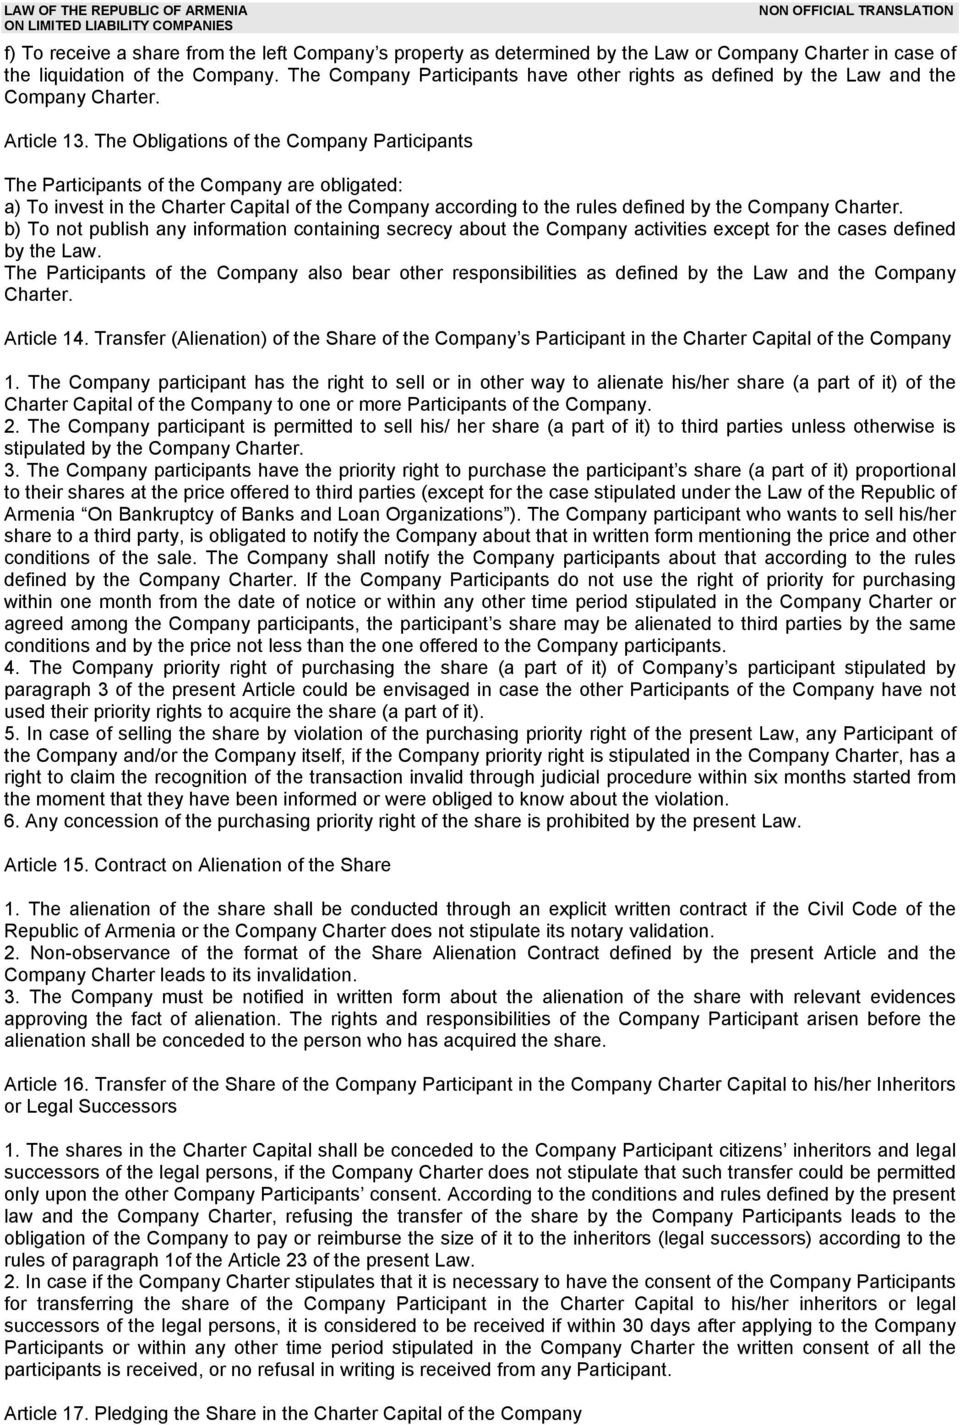 The Obligations of the Company Participants The Participants of the Company are obligated: a) To invest in the Charter Capital of the Company according to the rules defined by the Company Charter.